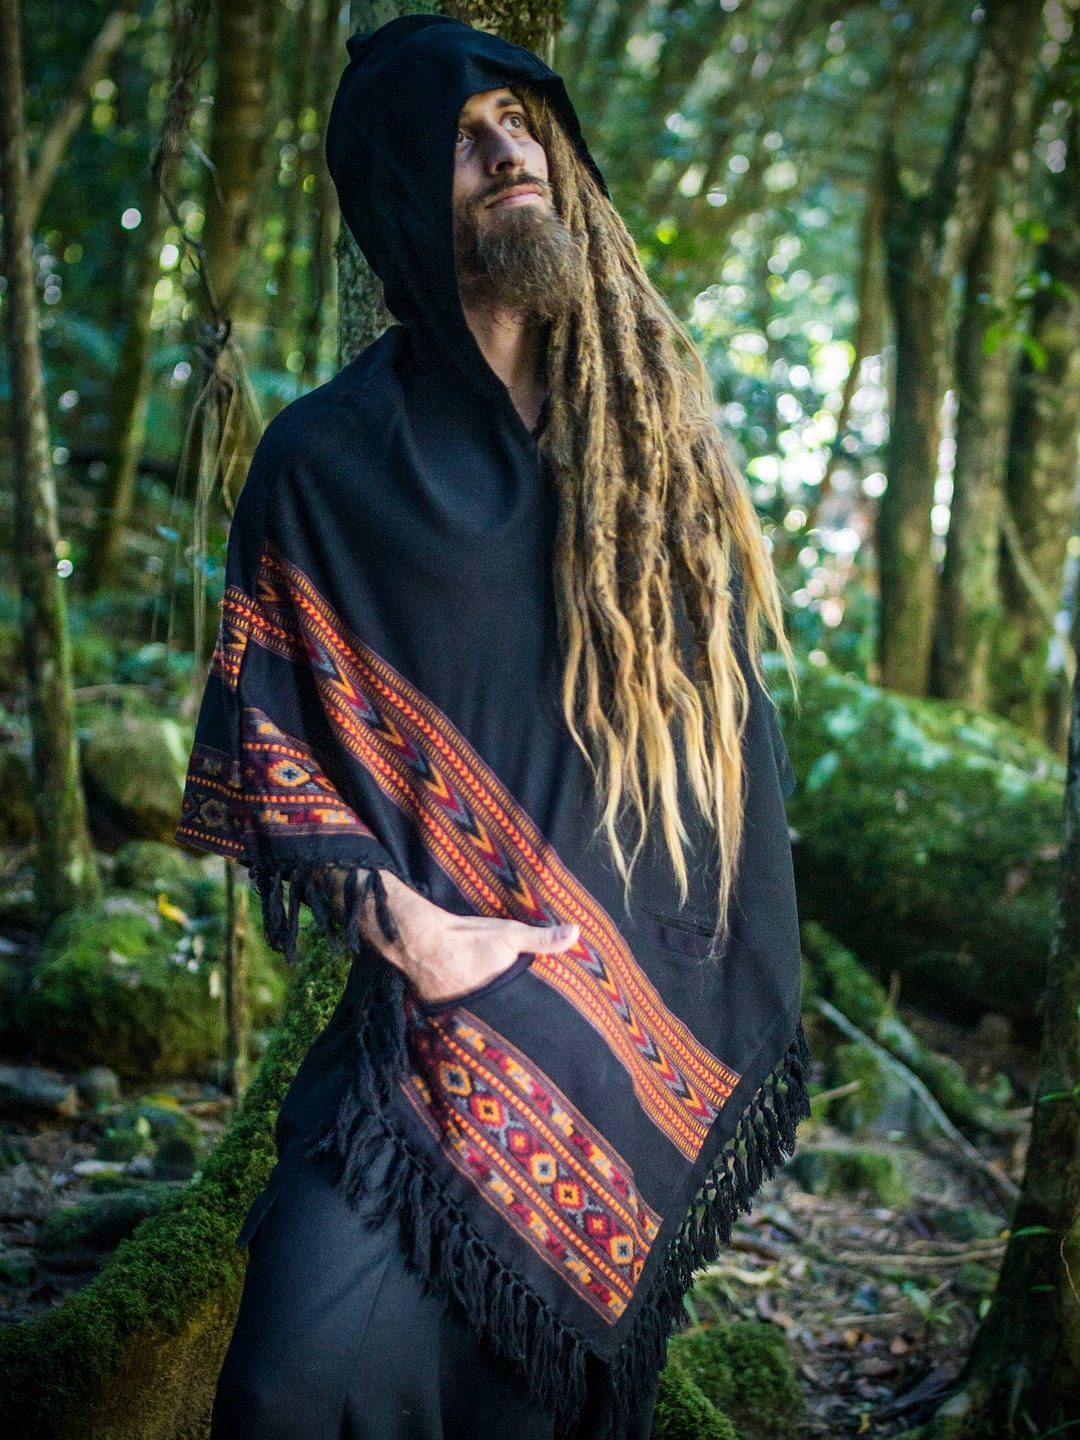 Black Poncho Yak Wool Handmade with Large Hood and pockets, Earthy Tribal Pattern Festival Gypsy   Mens Mexican Primitive Alternative